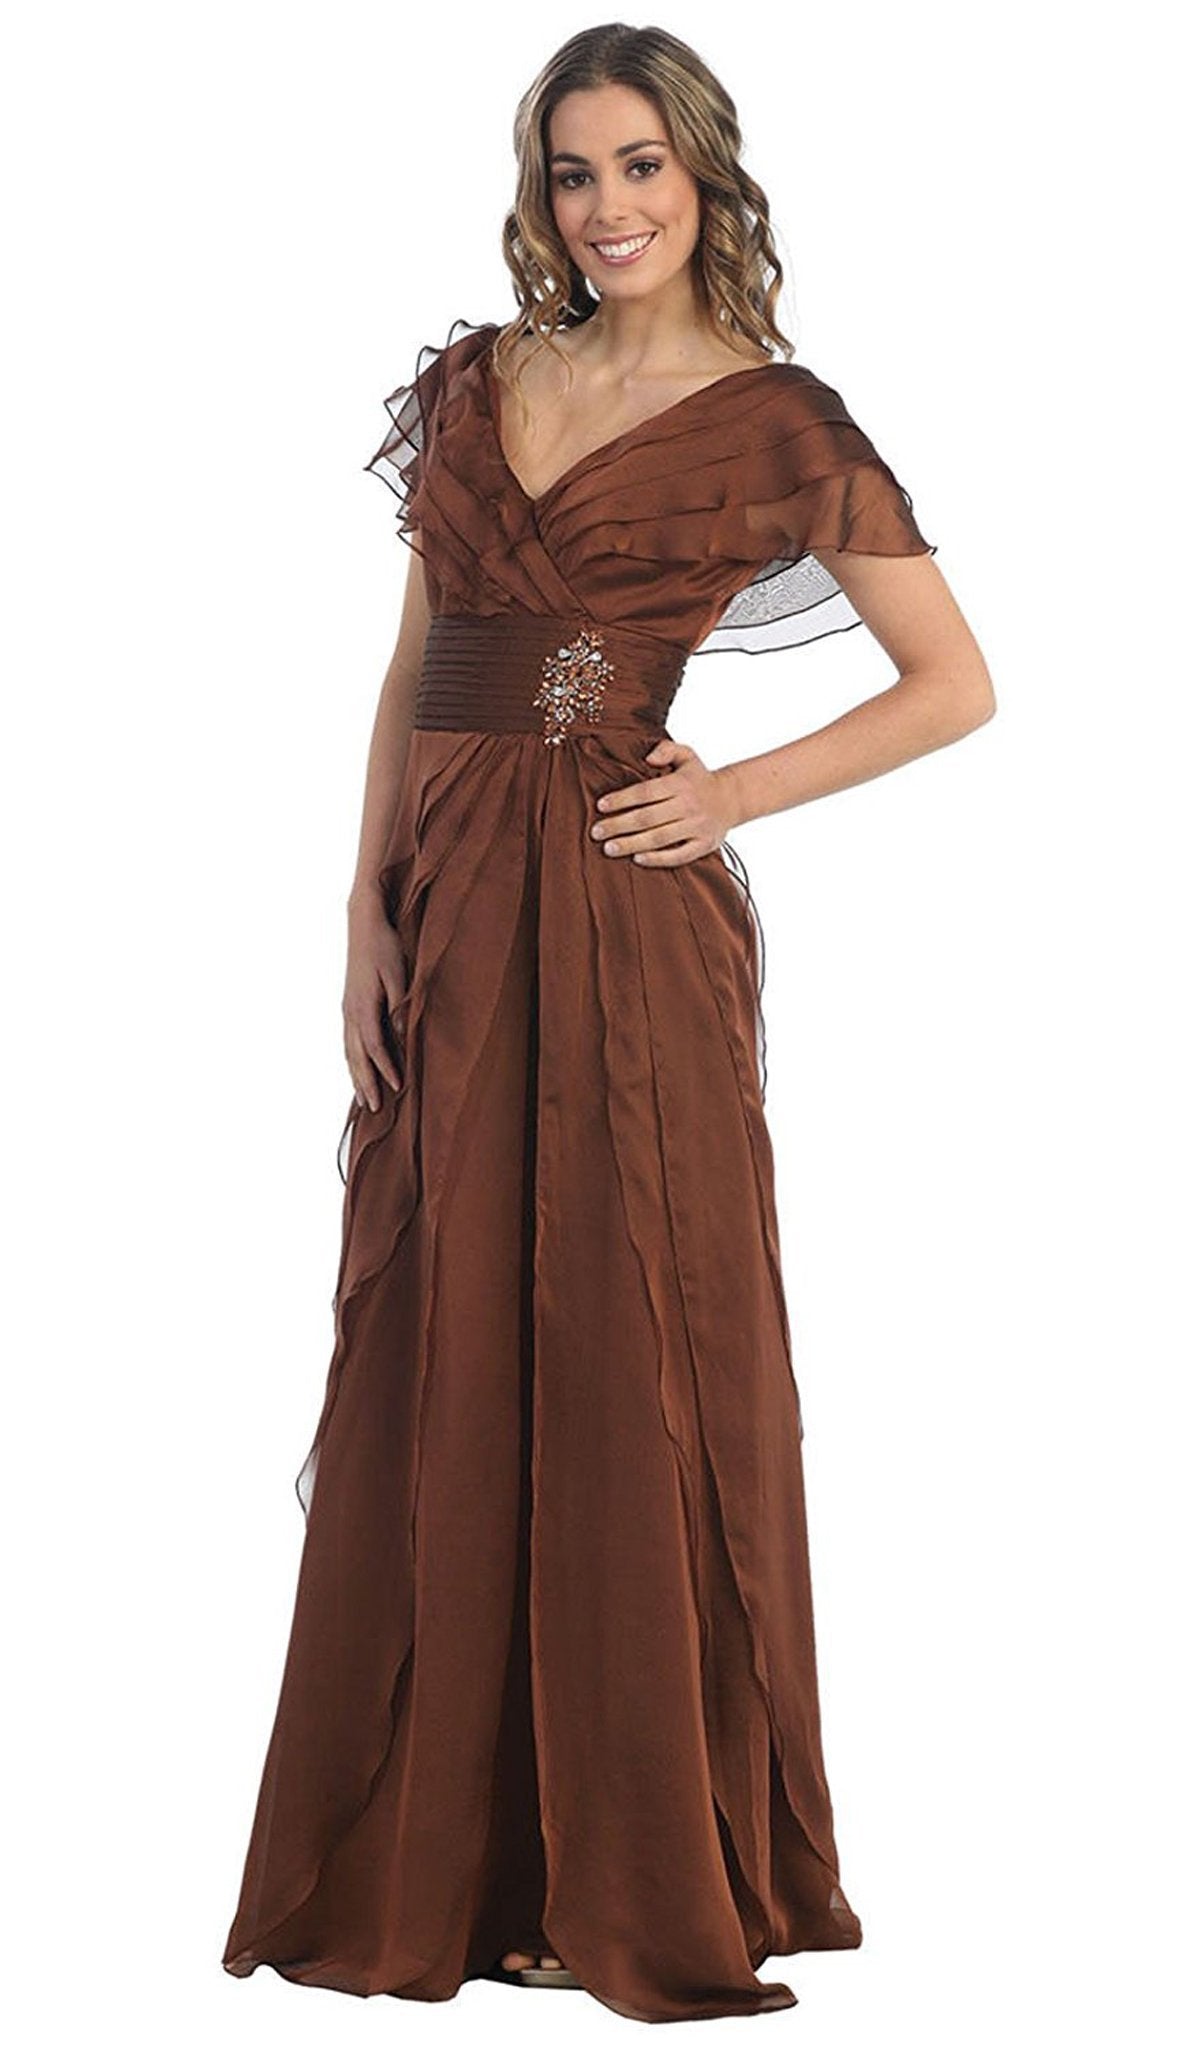 May Queen - MQ831 Tiered Chiffon Surplice V-Neck Formal Dress In Brown